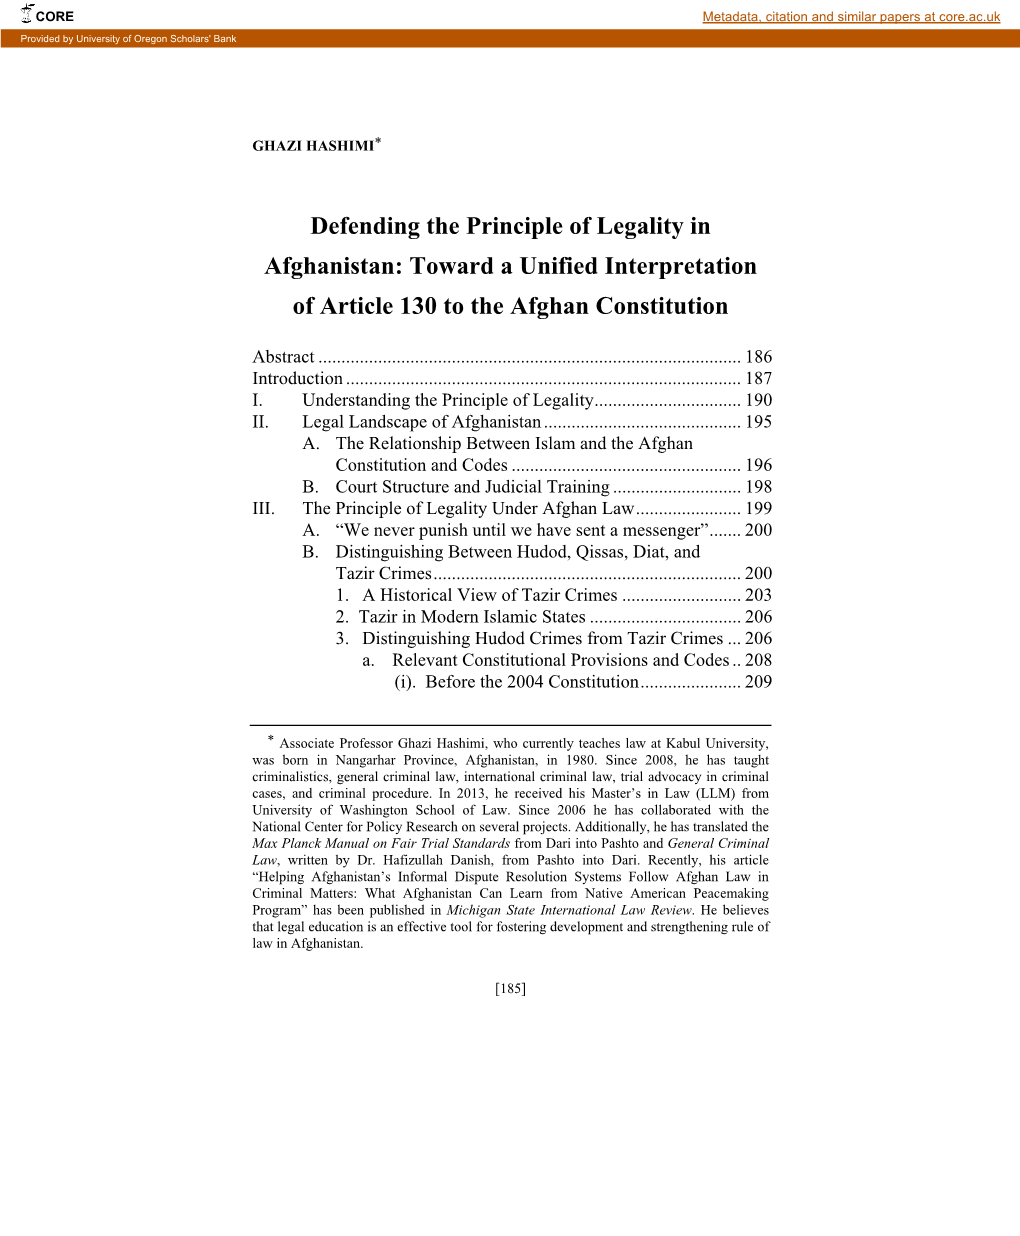 Defending the Principle of Legality in Afghanistan: Toward a Unified Interpretation of Article 130 to the Afghan Constitution